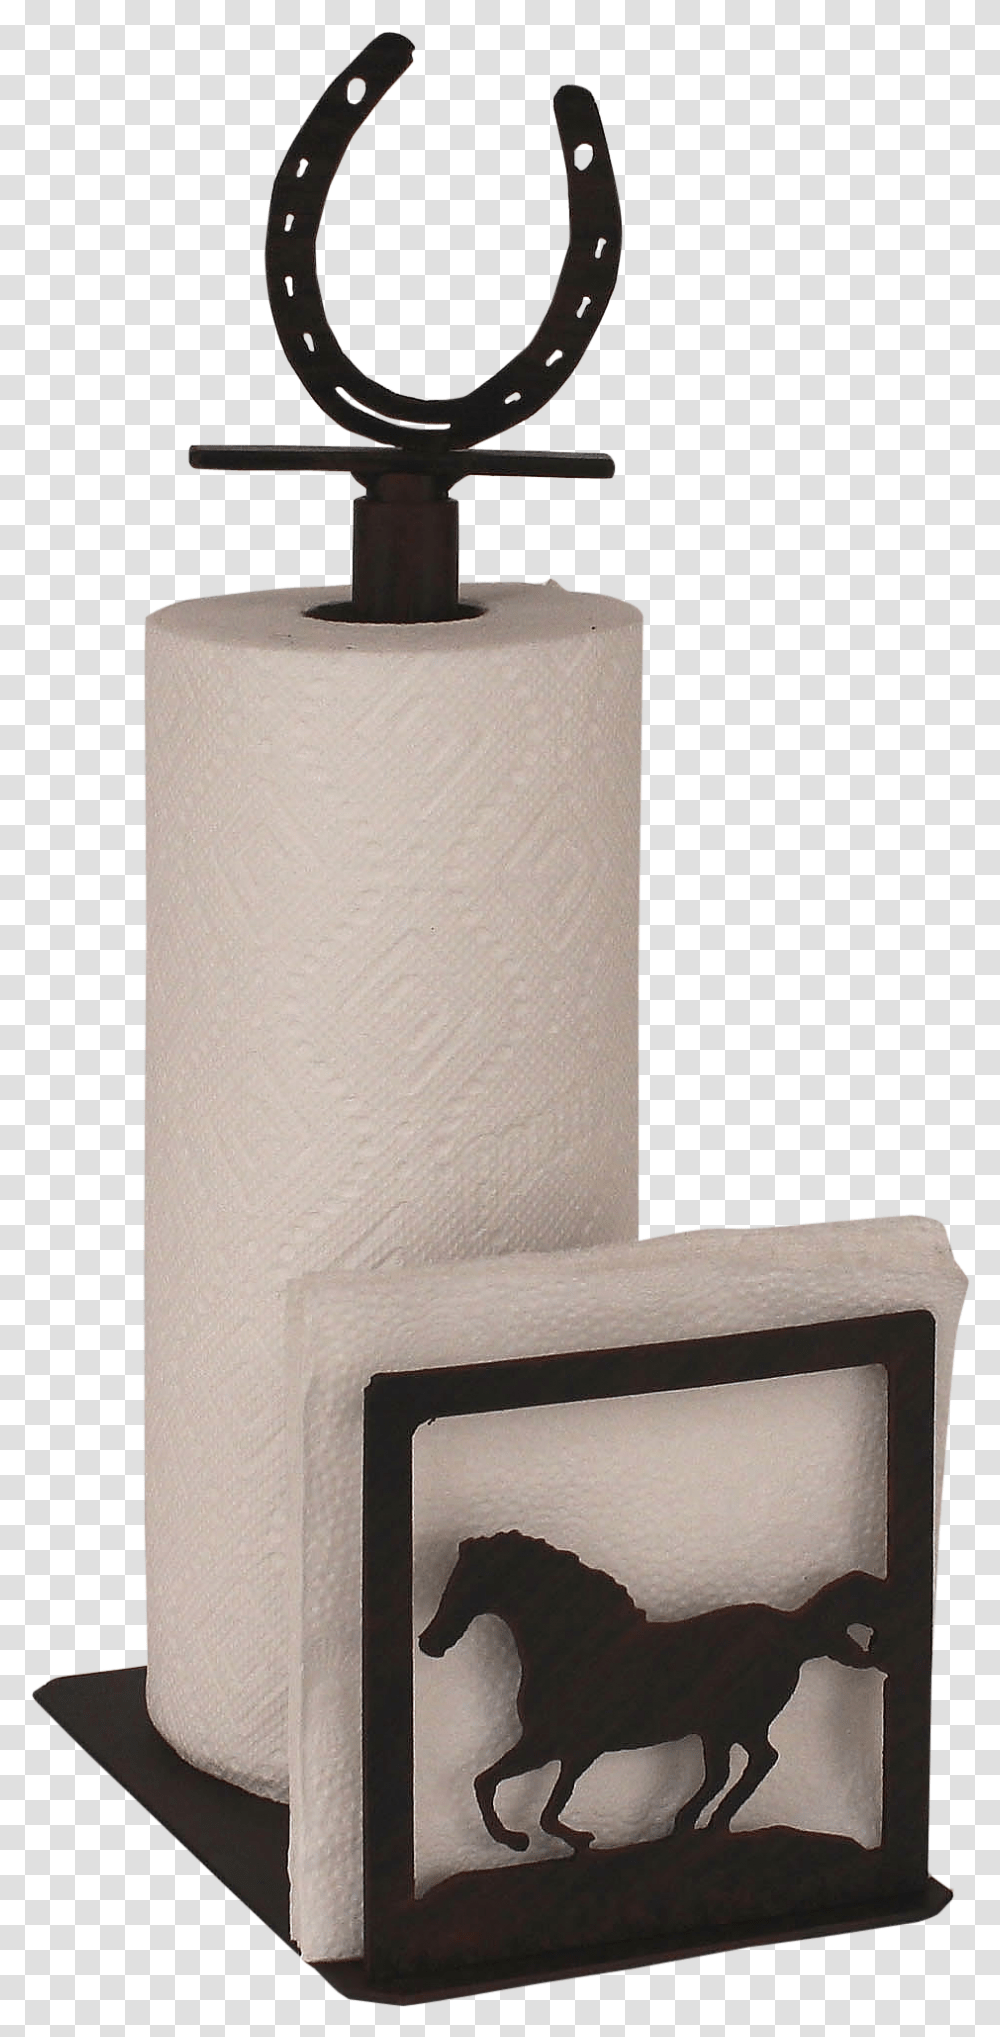 Iron Running Horsehorse Shoe Paper Towel And Napkin Paper Towel And Napkin Holder, Tissue, Toilet Paper, Lamp Transparent Png